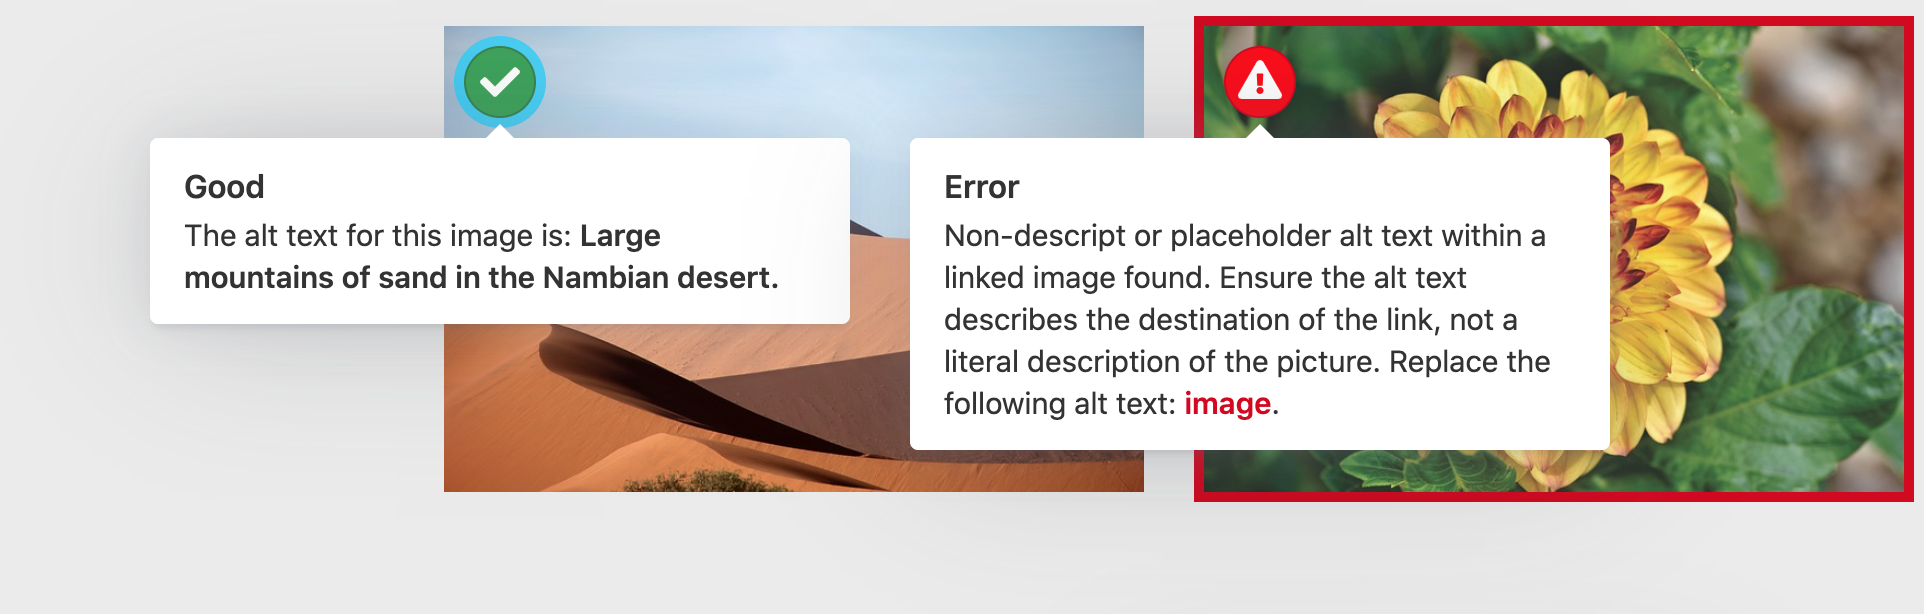 Screenshot of two images. One with a Good button, and the other with an Error button and red border. Long description below.